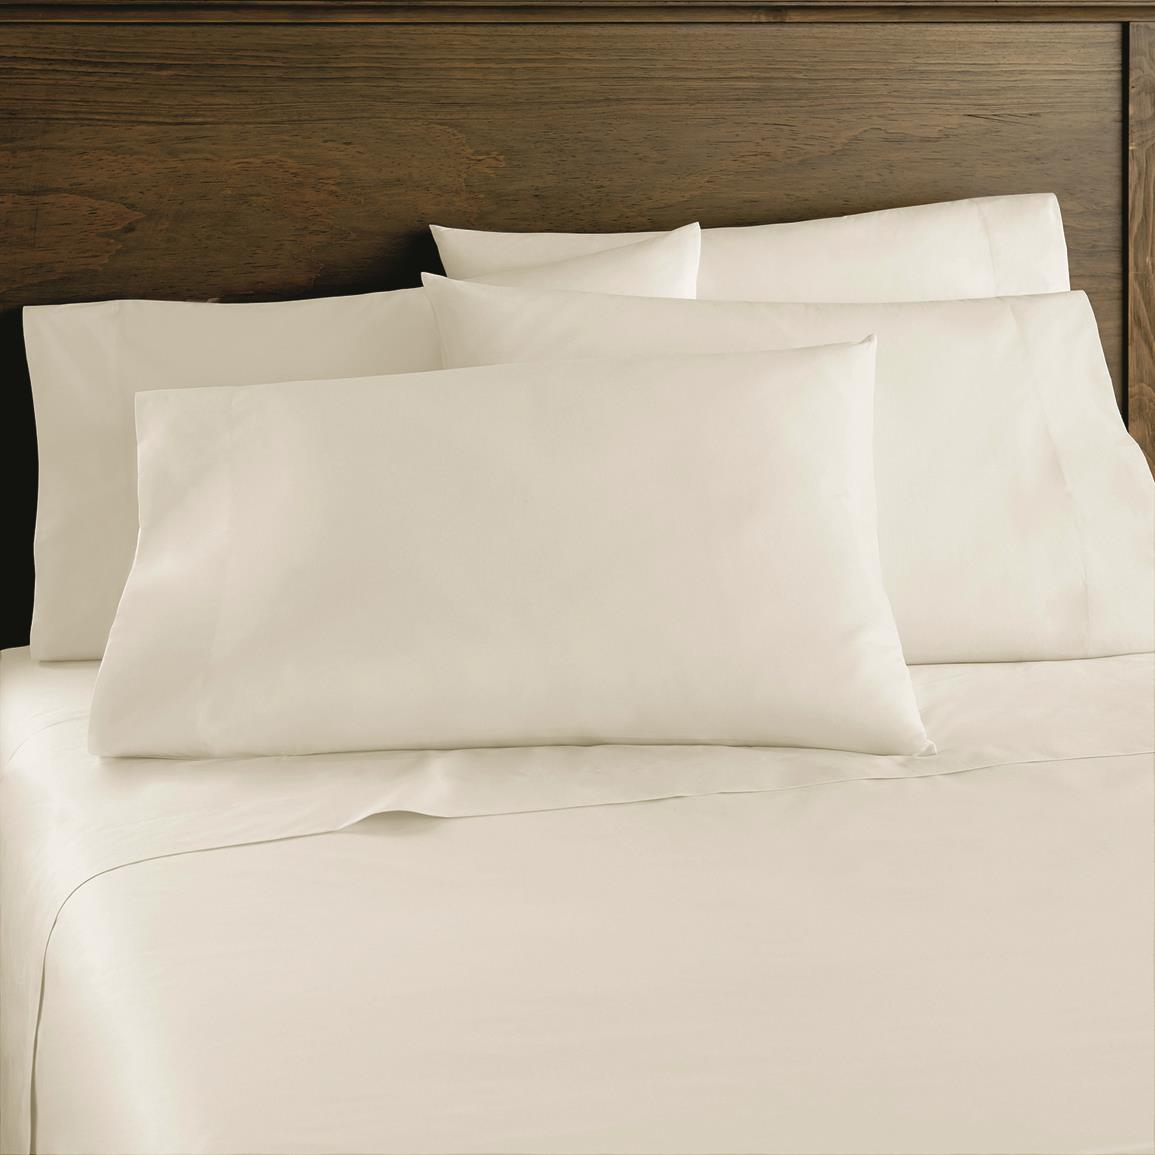 Shavel Home Products Cotton Sateen Bed Sheet Set, Sandy Beige